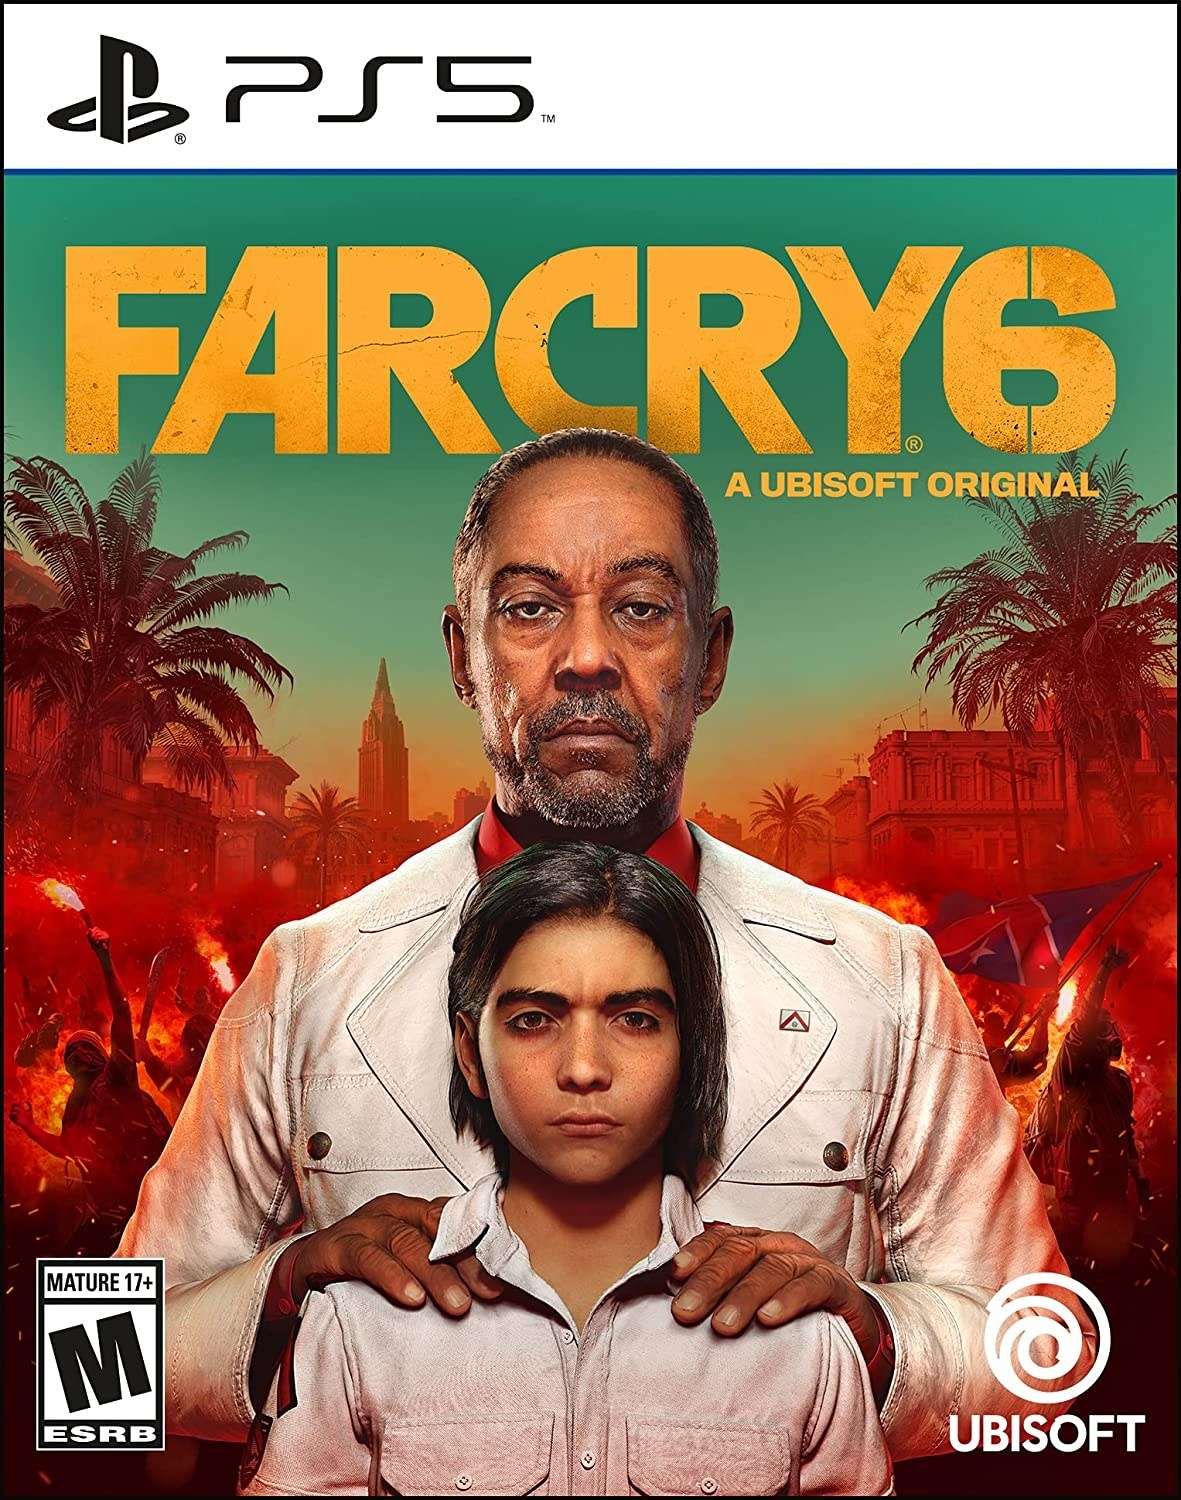 The cover of Far Cry 6